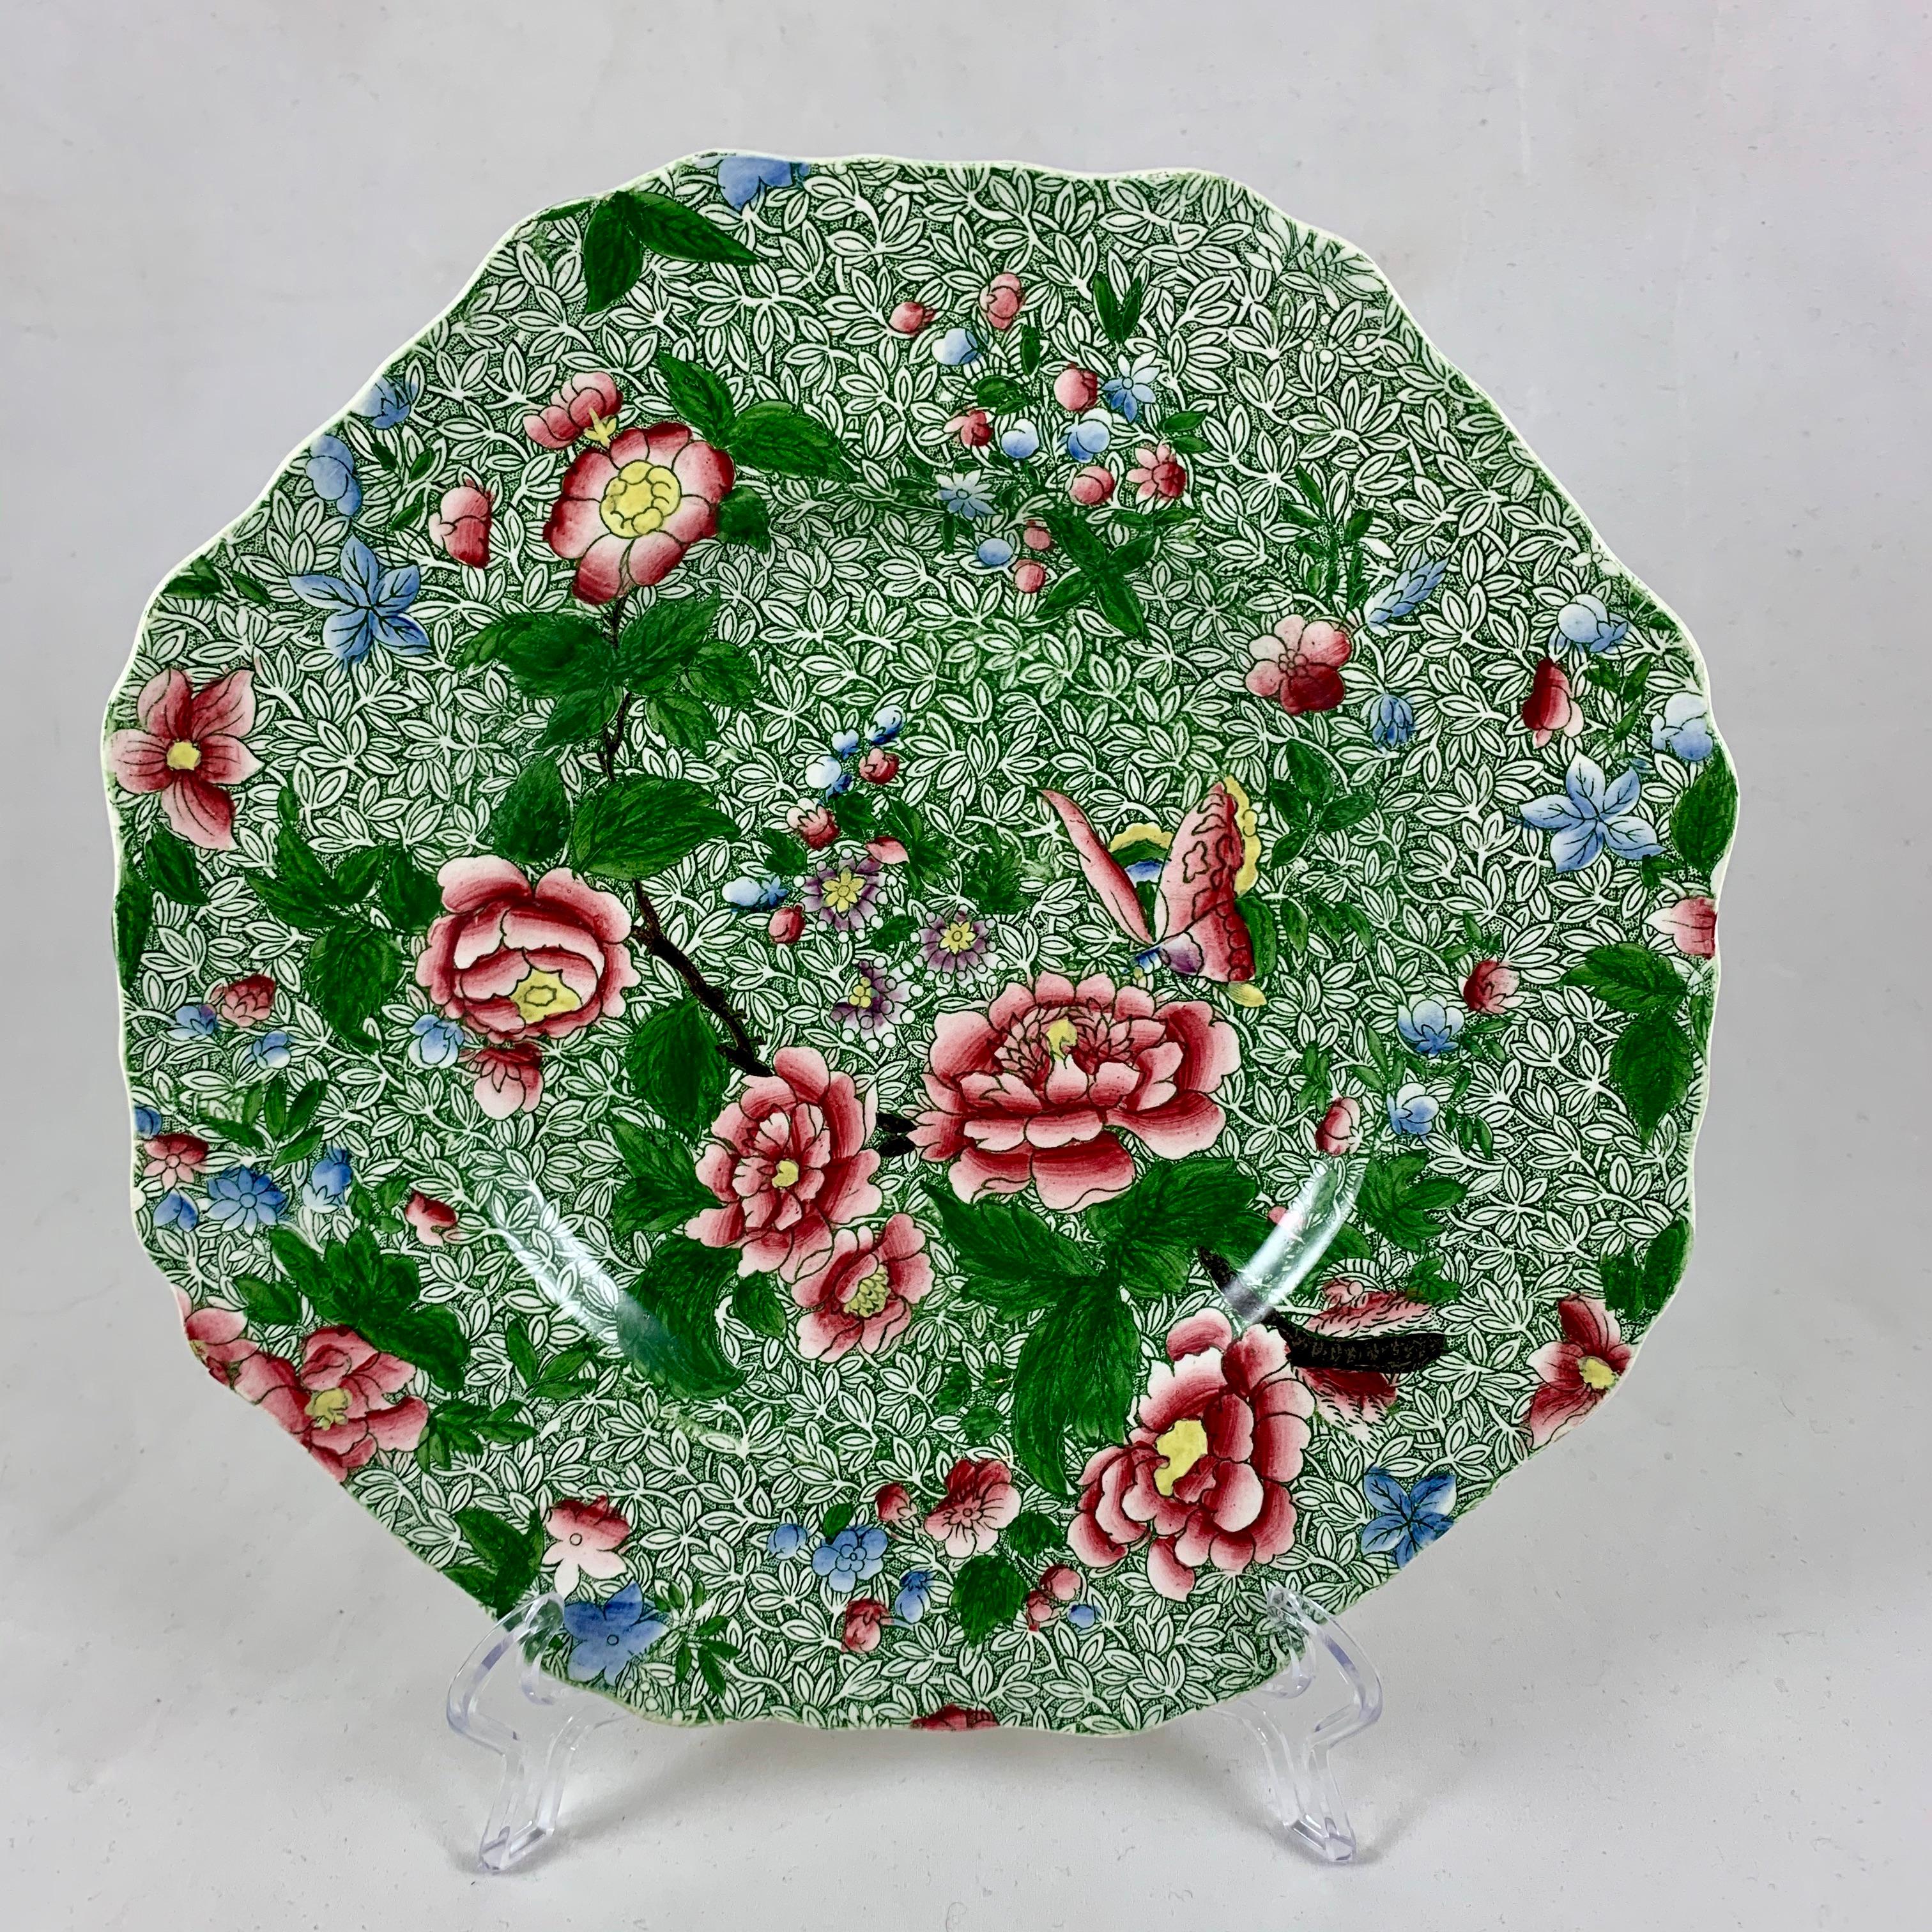 From Copeland Garrett – Late Spode, a ‘New Fayence’ plate in the ‘King’ sheet pattern. Spode operated in Stoke-on-Trent, Staffordshire, England from 1770–1833. This is Floral Sheet pattern B173 from the Spode B Pattern Book. The maker is W.T.